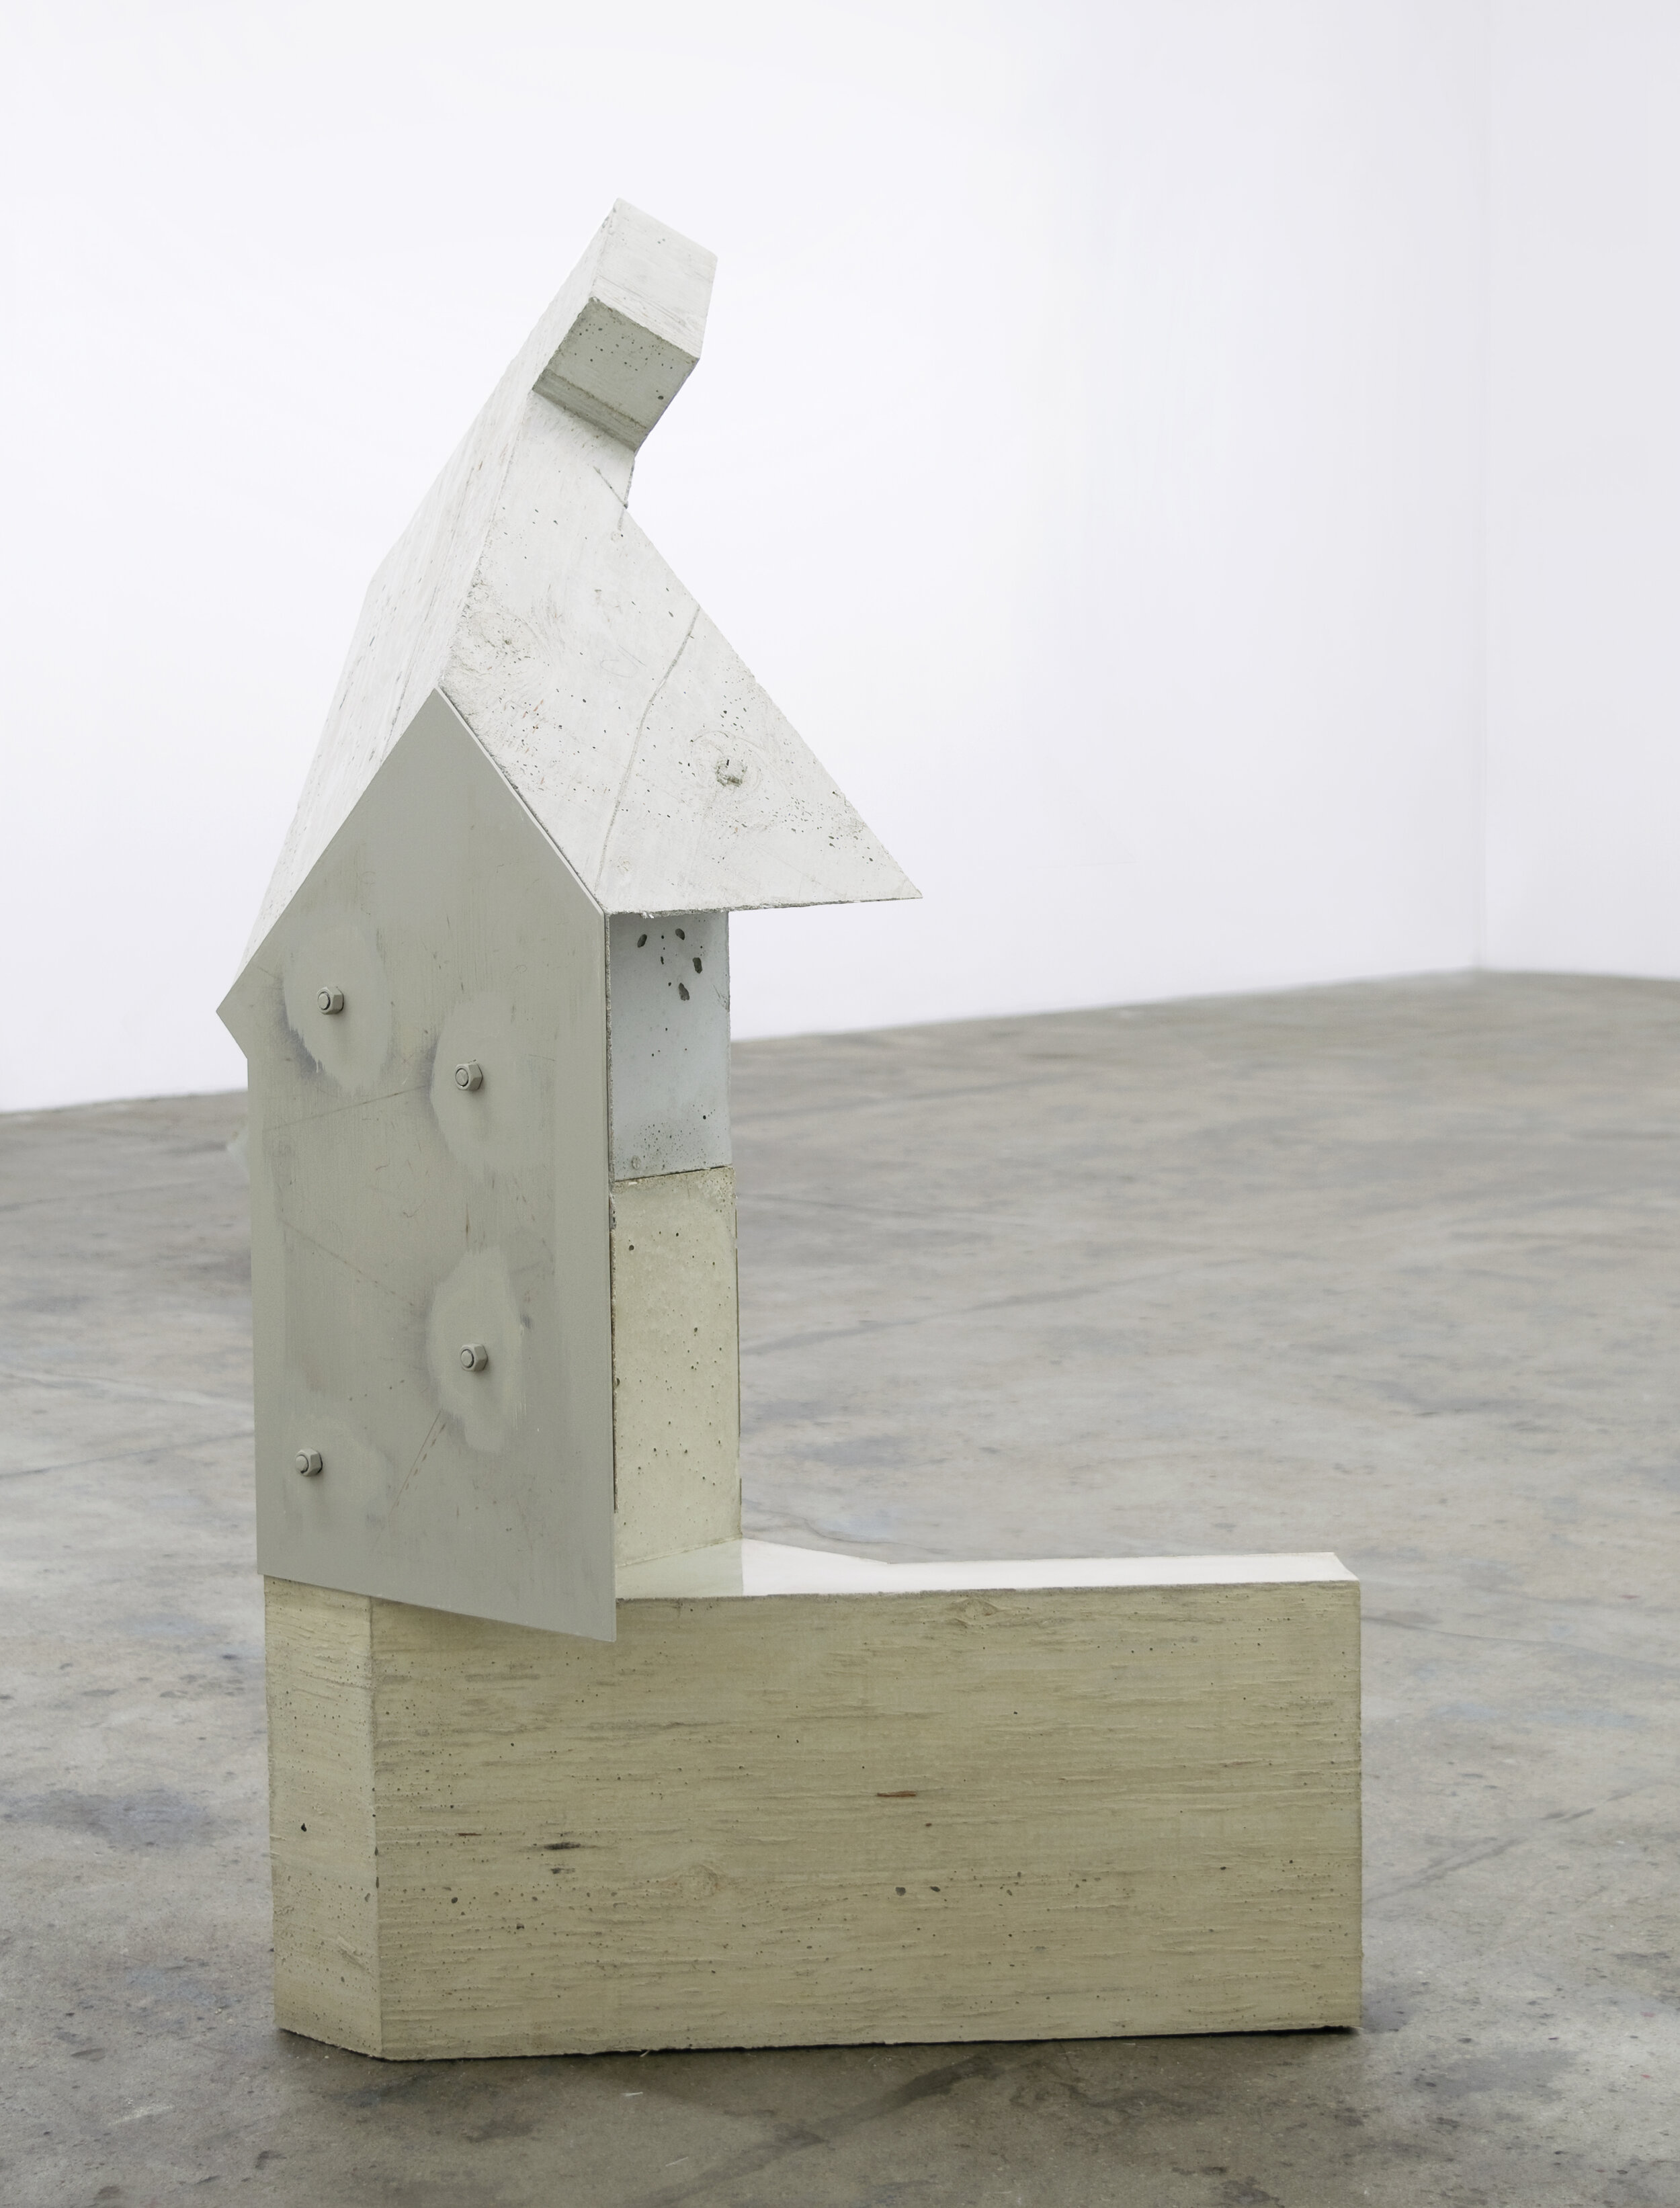   Theriôme , 2019, fibre-reinforced concrete, painted steel, stainless steel hardware, 44 x 31 x 18 in 